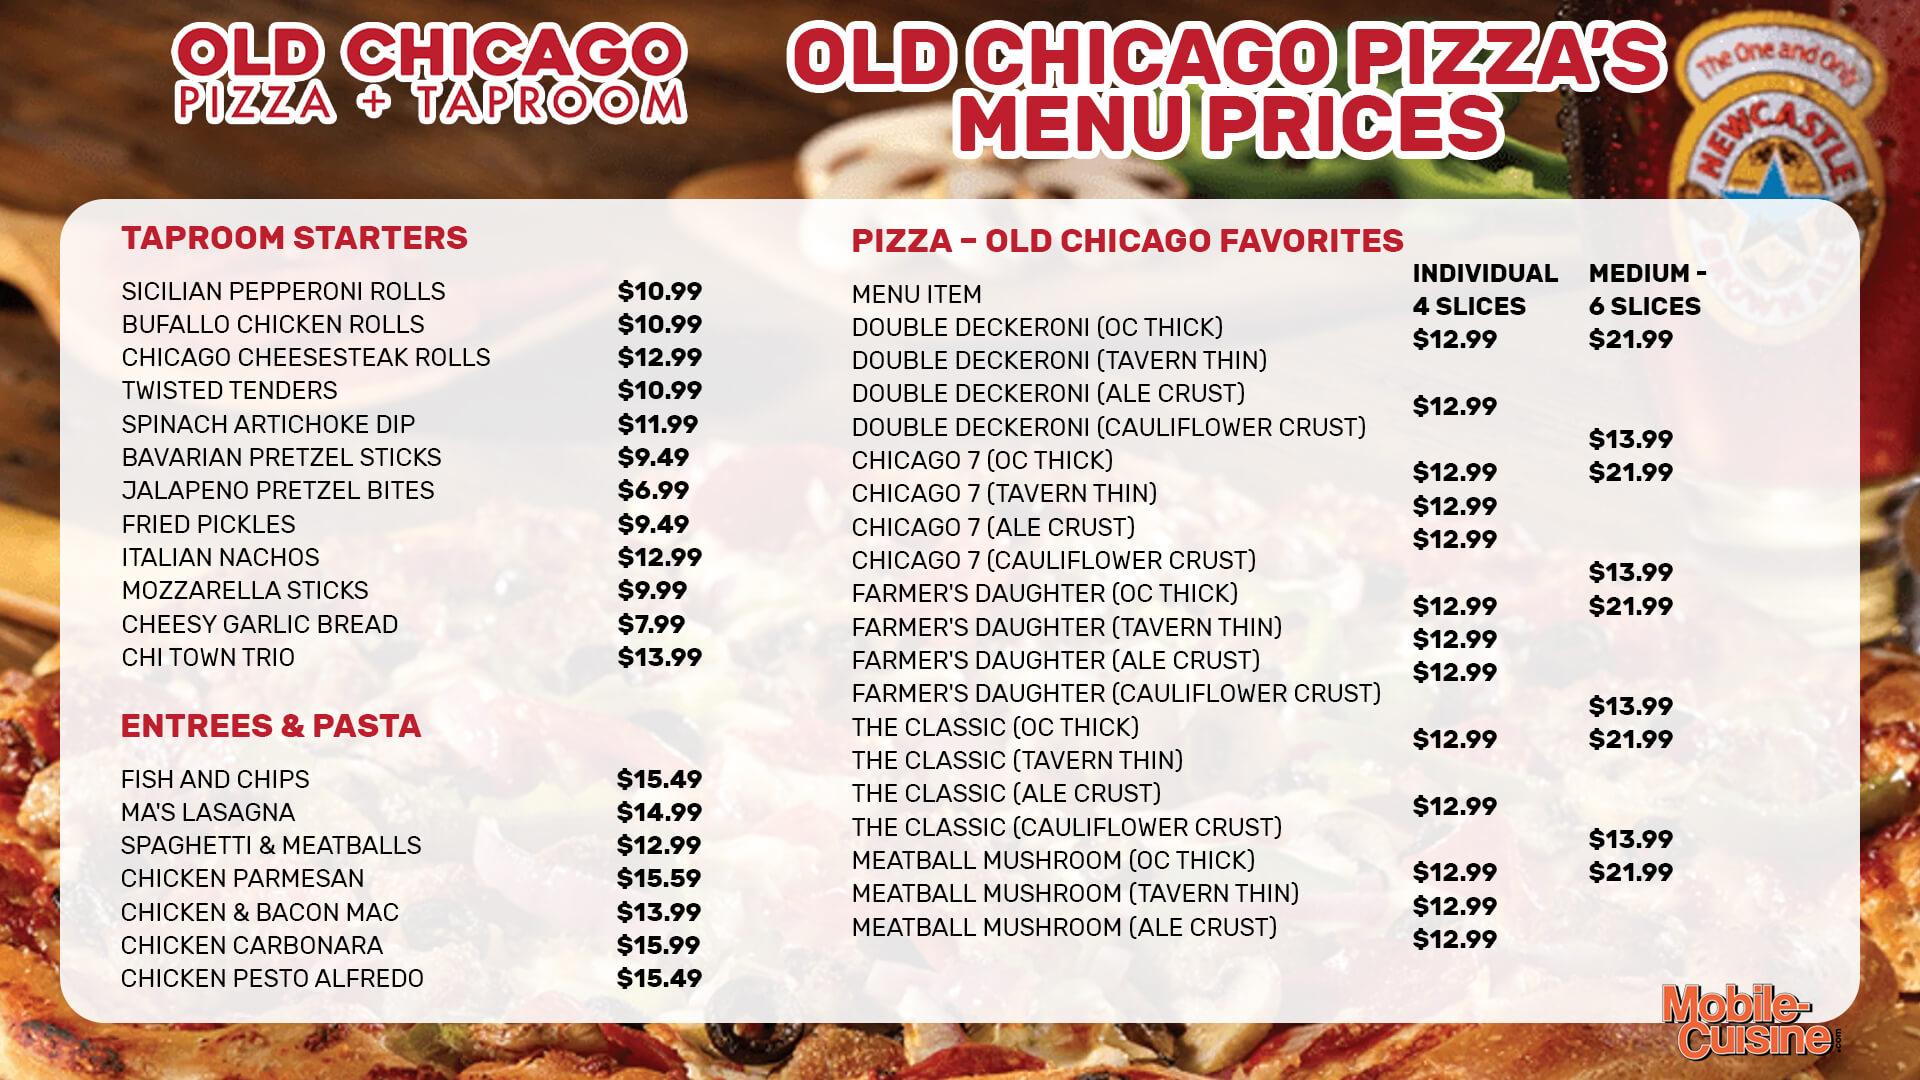 Old-Chicago-Pizza-Menu-Prices